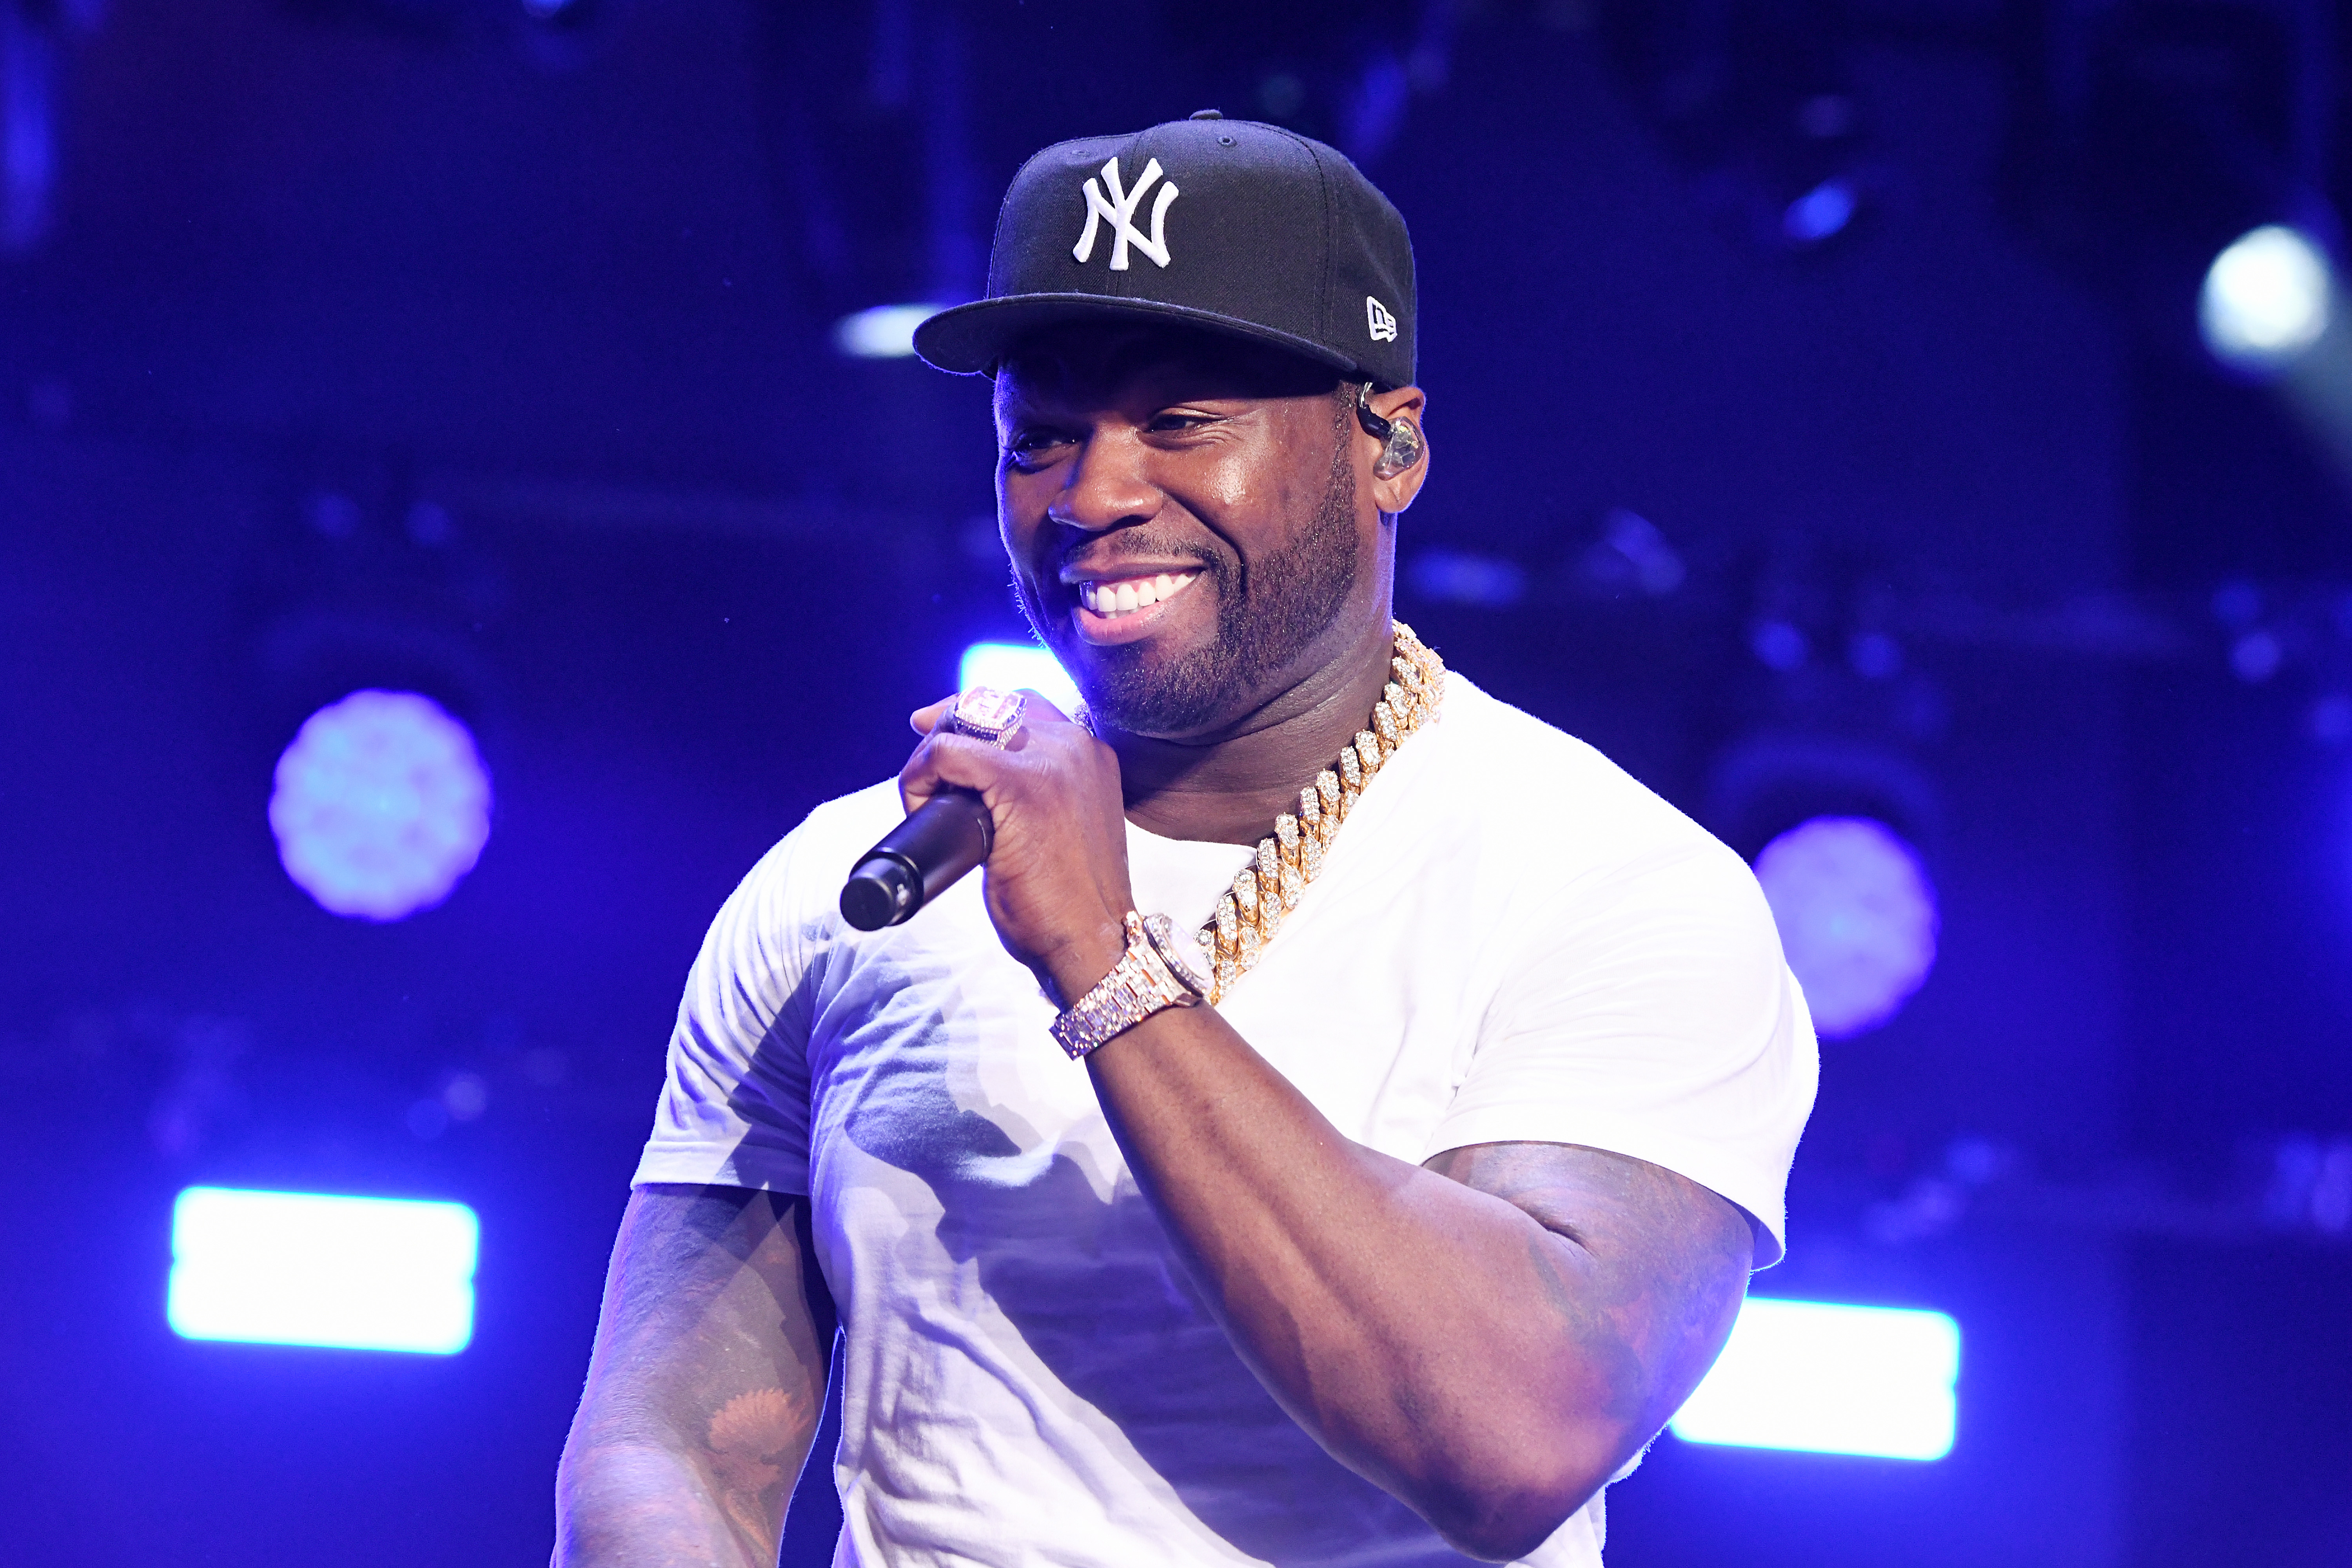 50 Cent Admits Hanging Upside Down At Super Bowl Was A “Mistake”